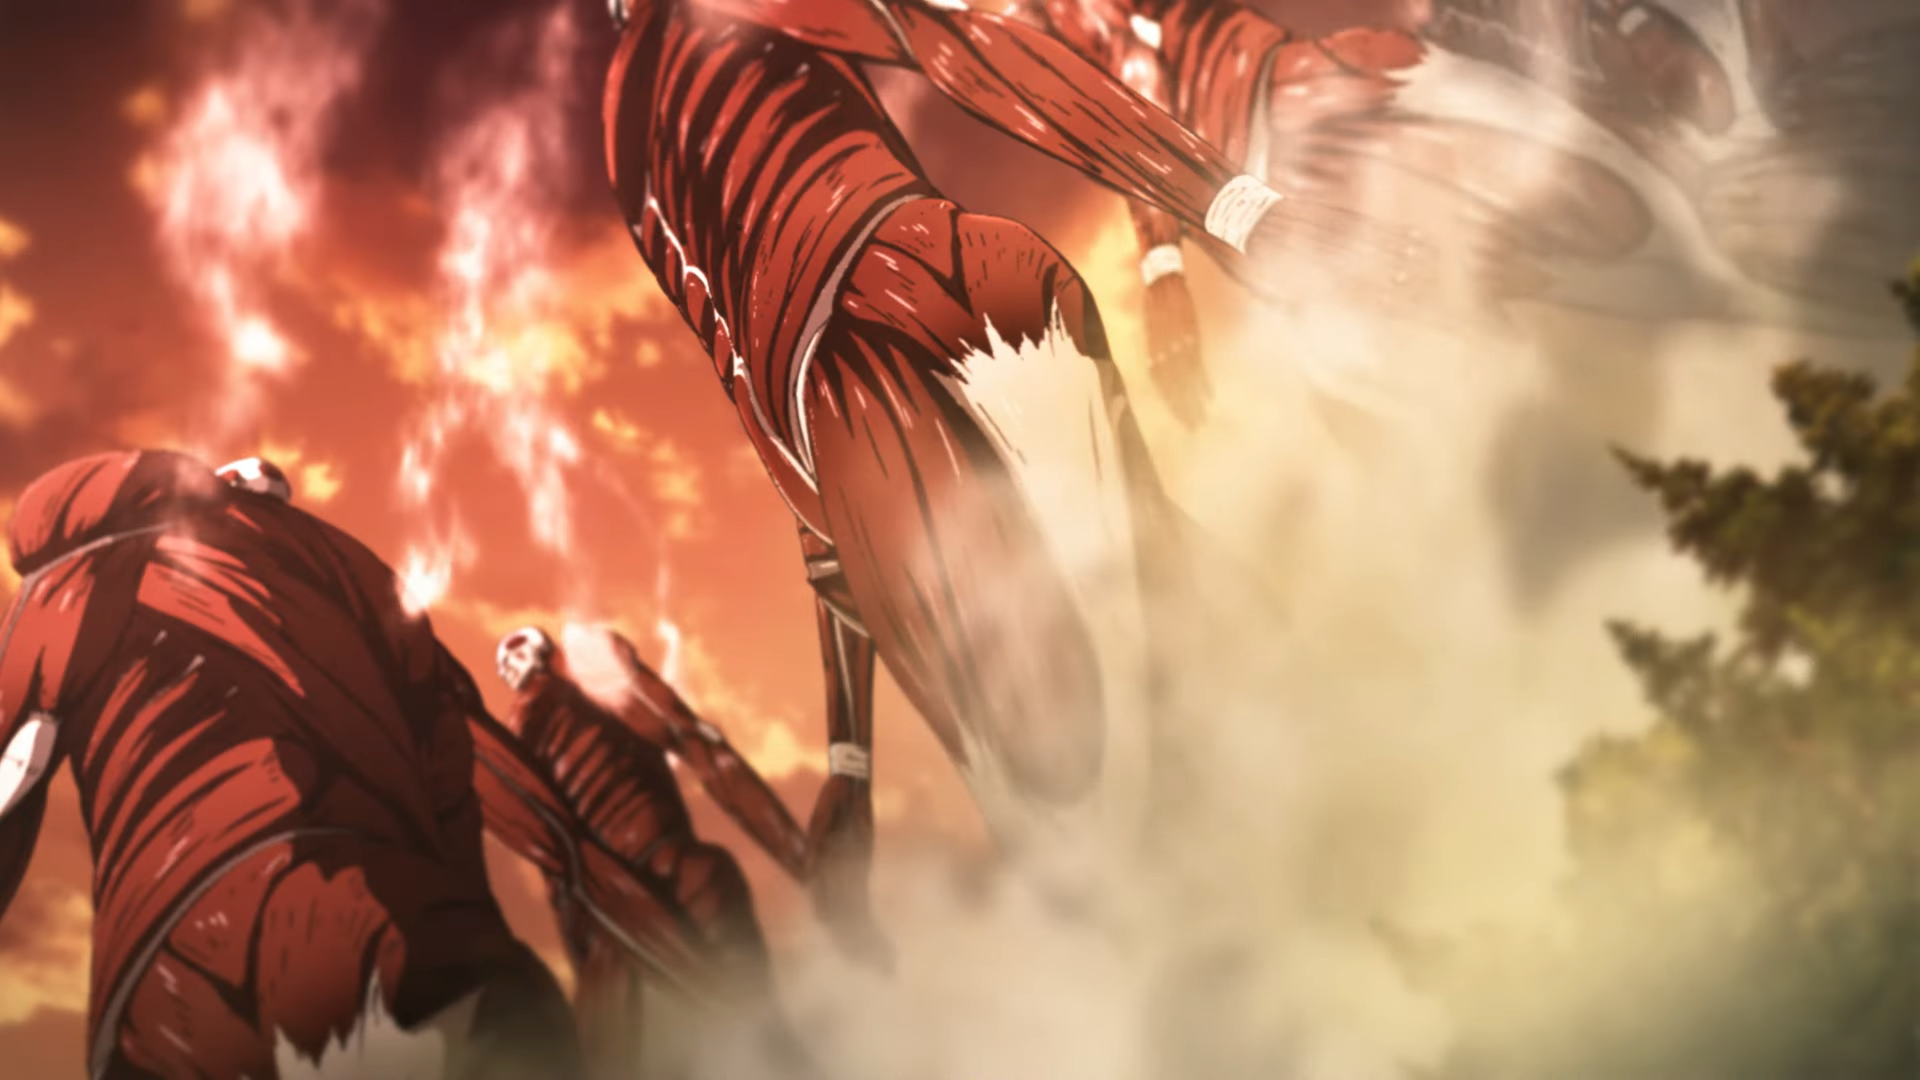 Crunchyroll to Stream Attack on Titan: The Final Chapters Part 2